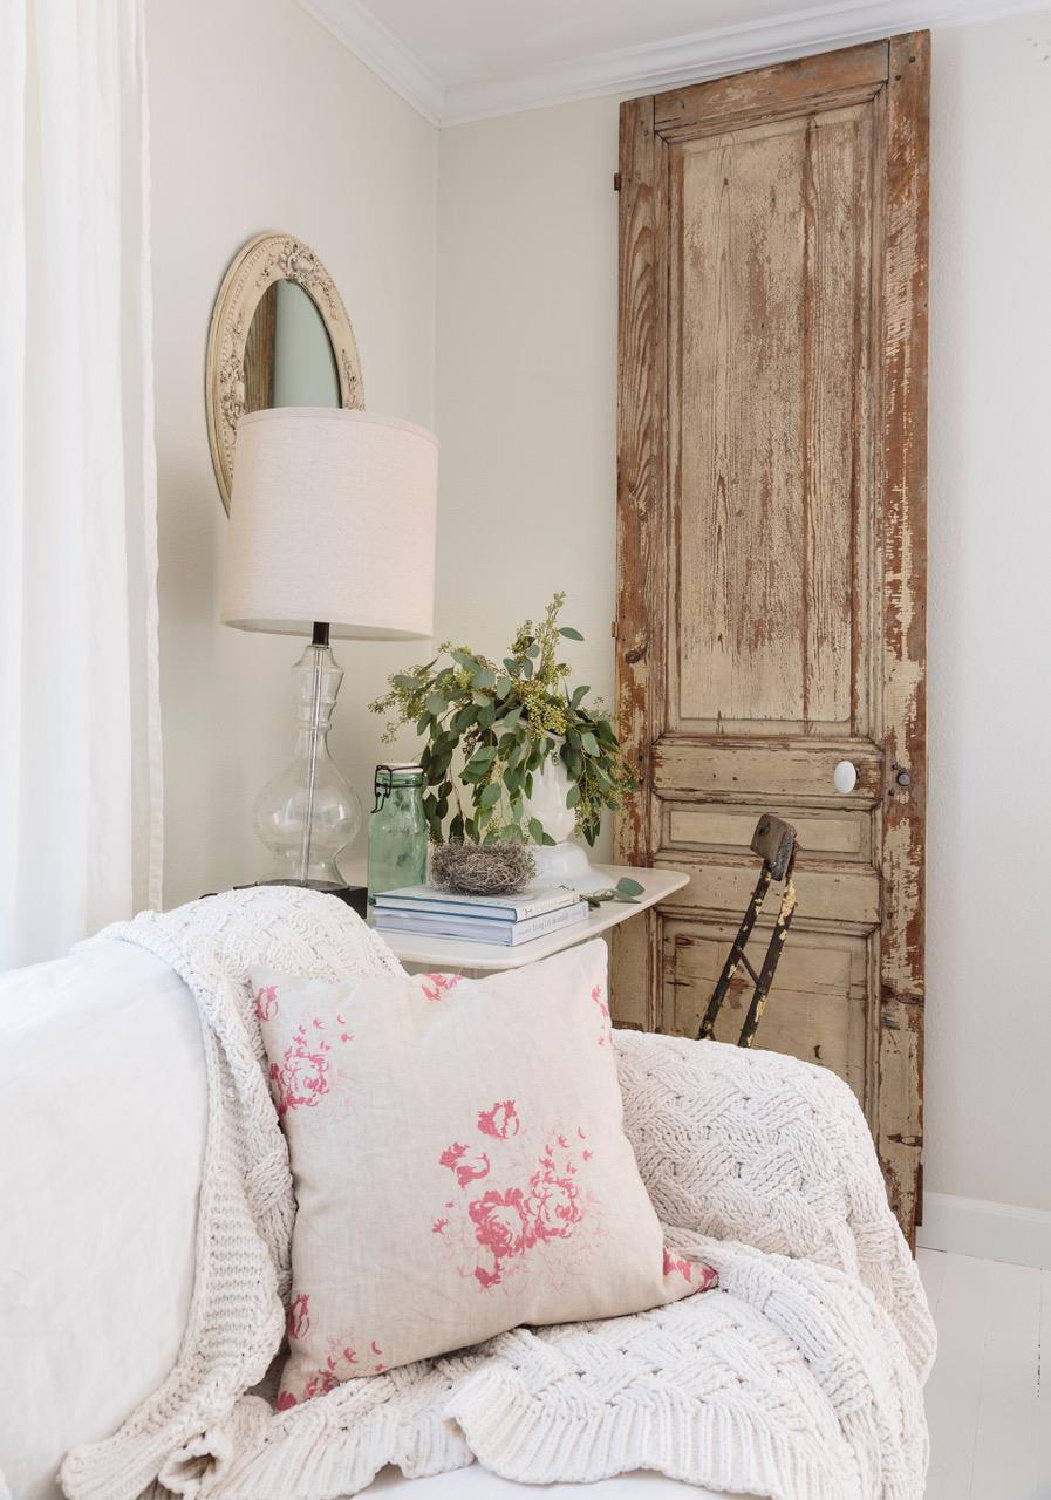 Rustic vintage wood door as an accent in a lovely white living room with Cabbages & Roses pillow. From Fifi O'Neill's SHADES OF WHITE (CICO, 2021). #fifioneill #vintagestyle